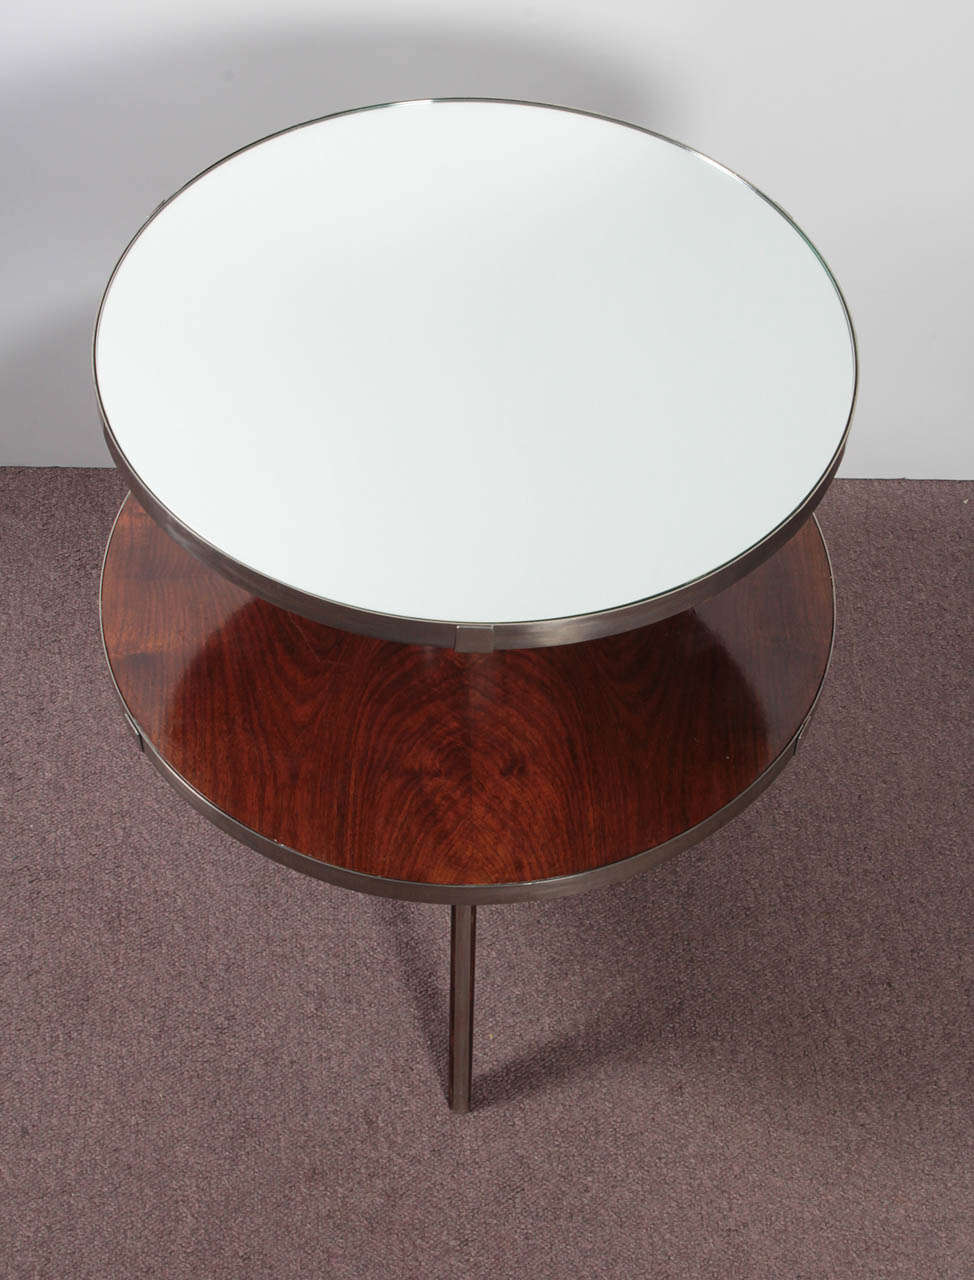 French Art Deco Occasional Table in Wood, Mirror, Nickel -Maurice Triboy For Sale 3